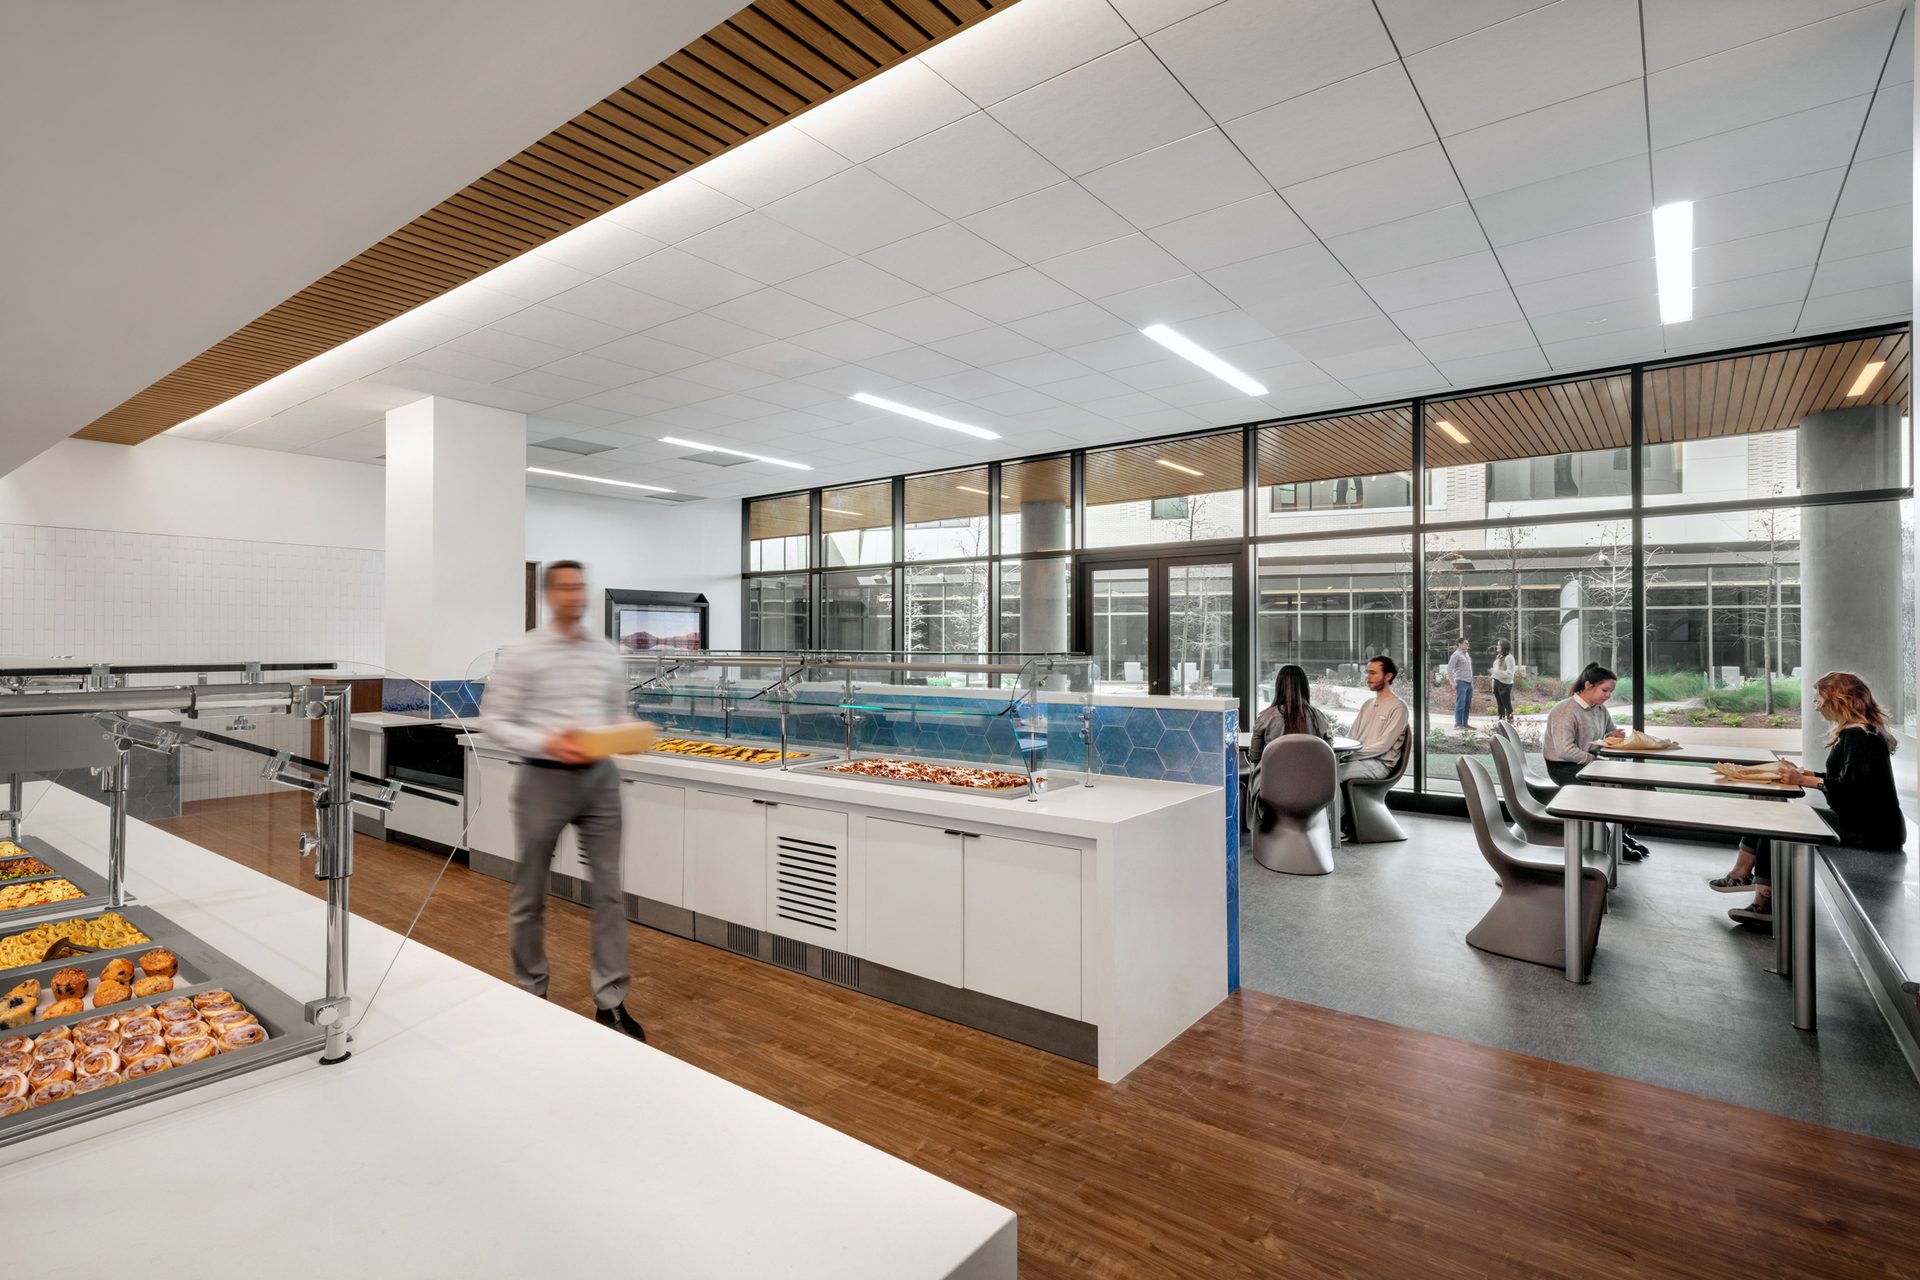 John S. Dunn Behavioral Sciences Center in Houston Features Ceiling Systems